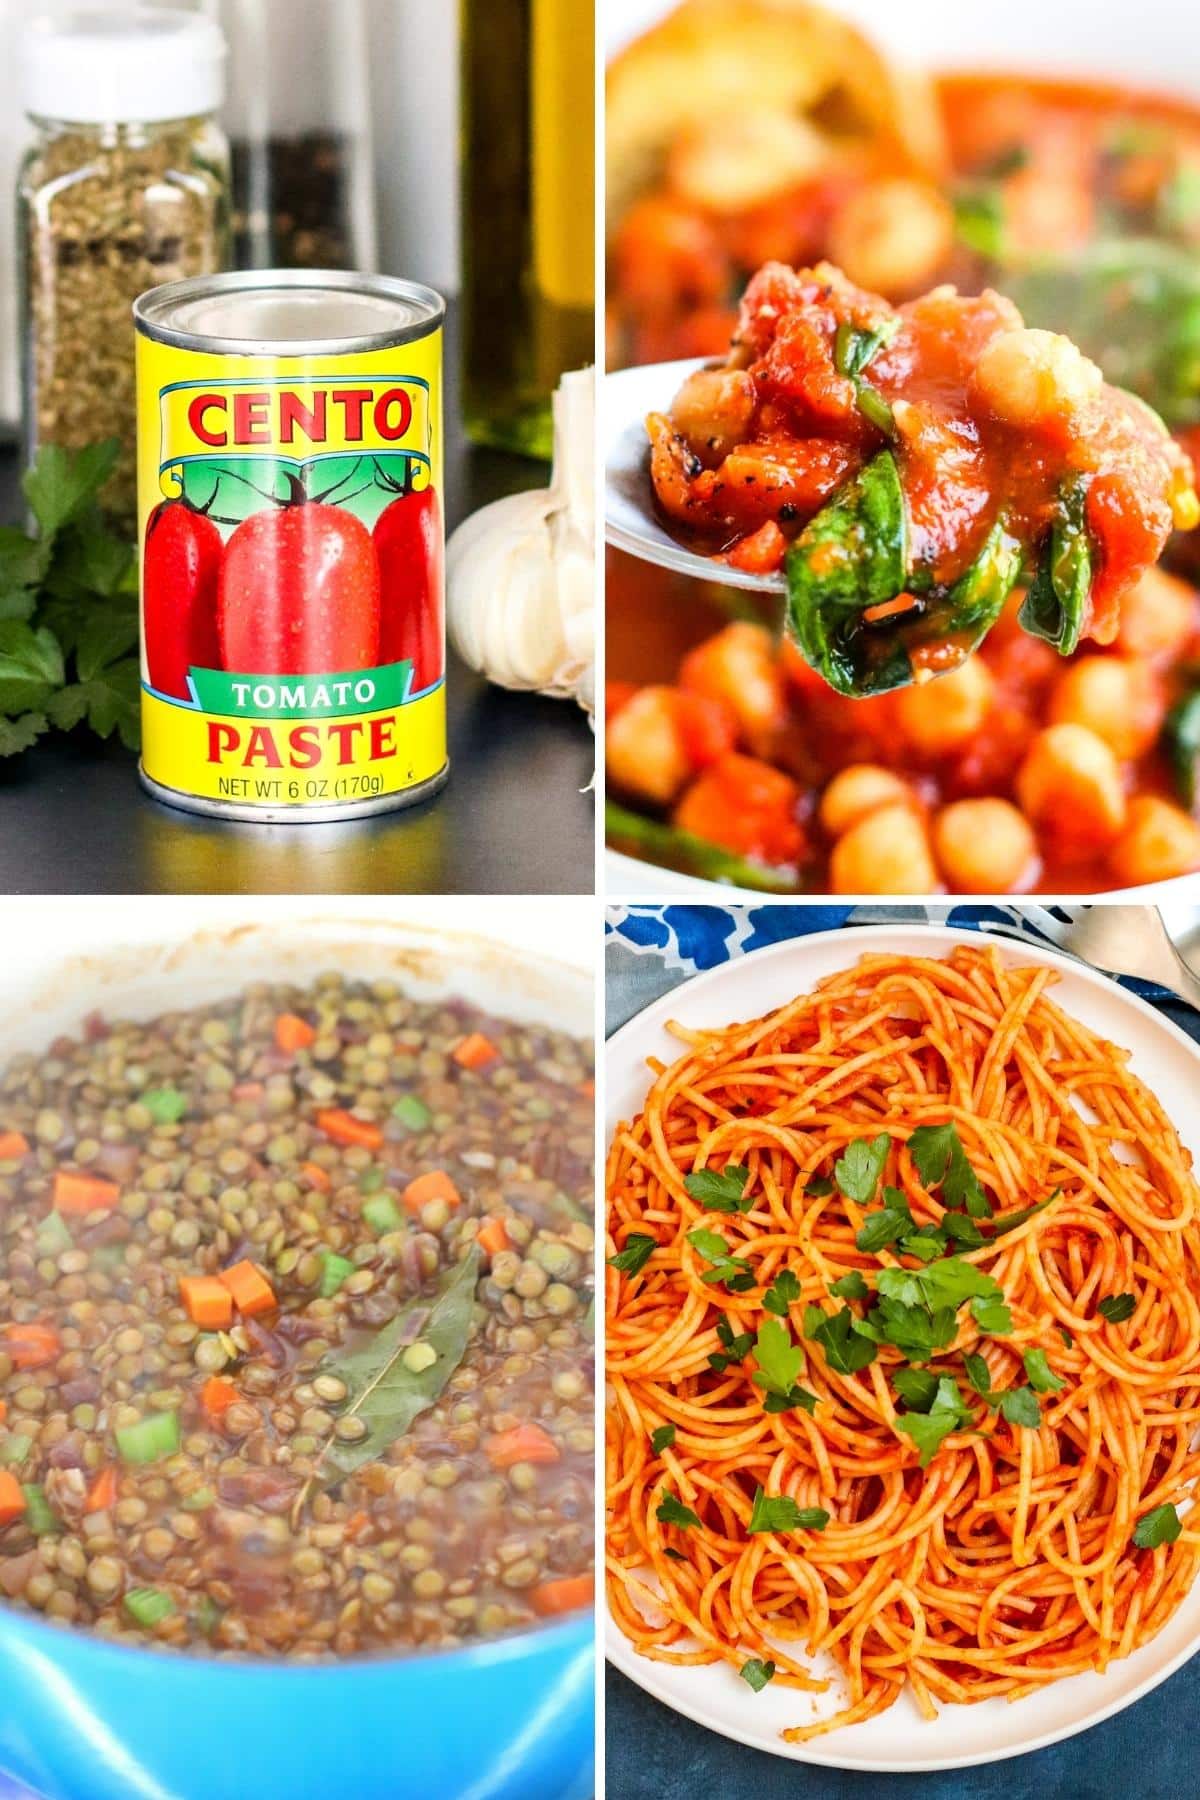 A can of tomato paste, a spoon in a bowl of Spanish Chickpea Stew, a pot of lentil soup, and a plate of spaghetti with red sauce.